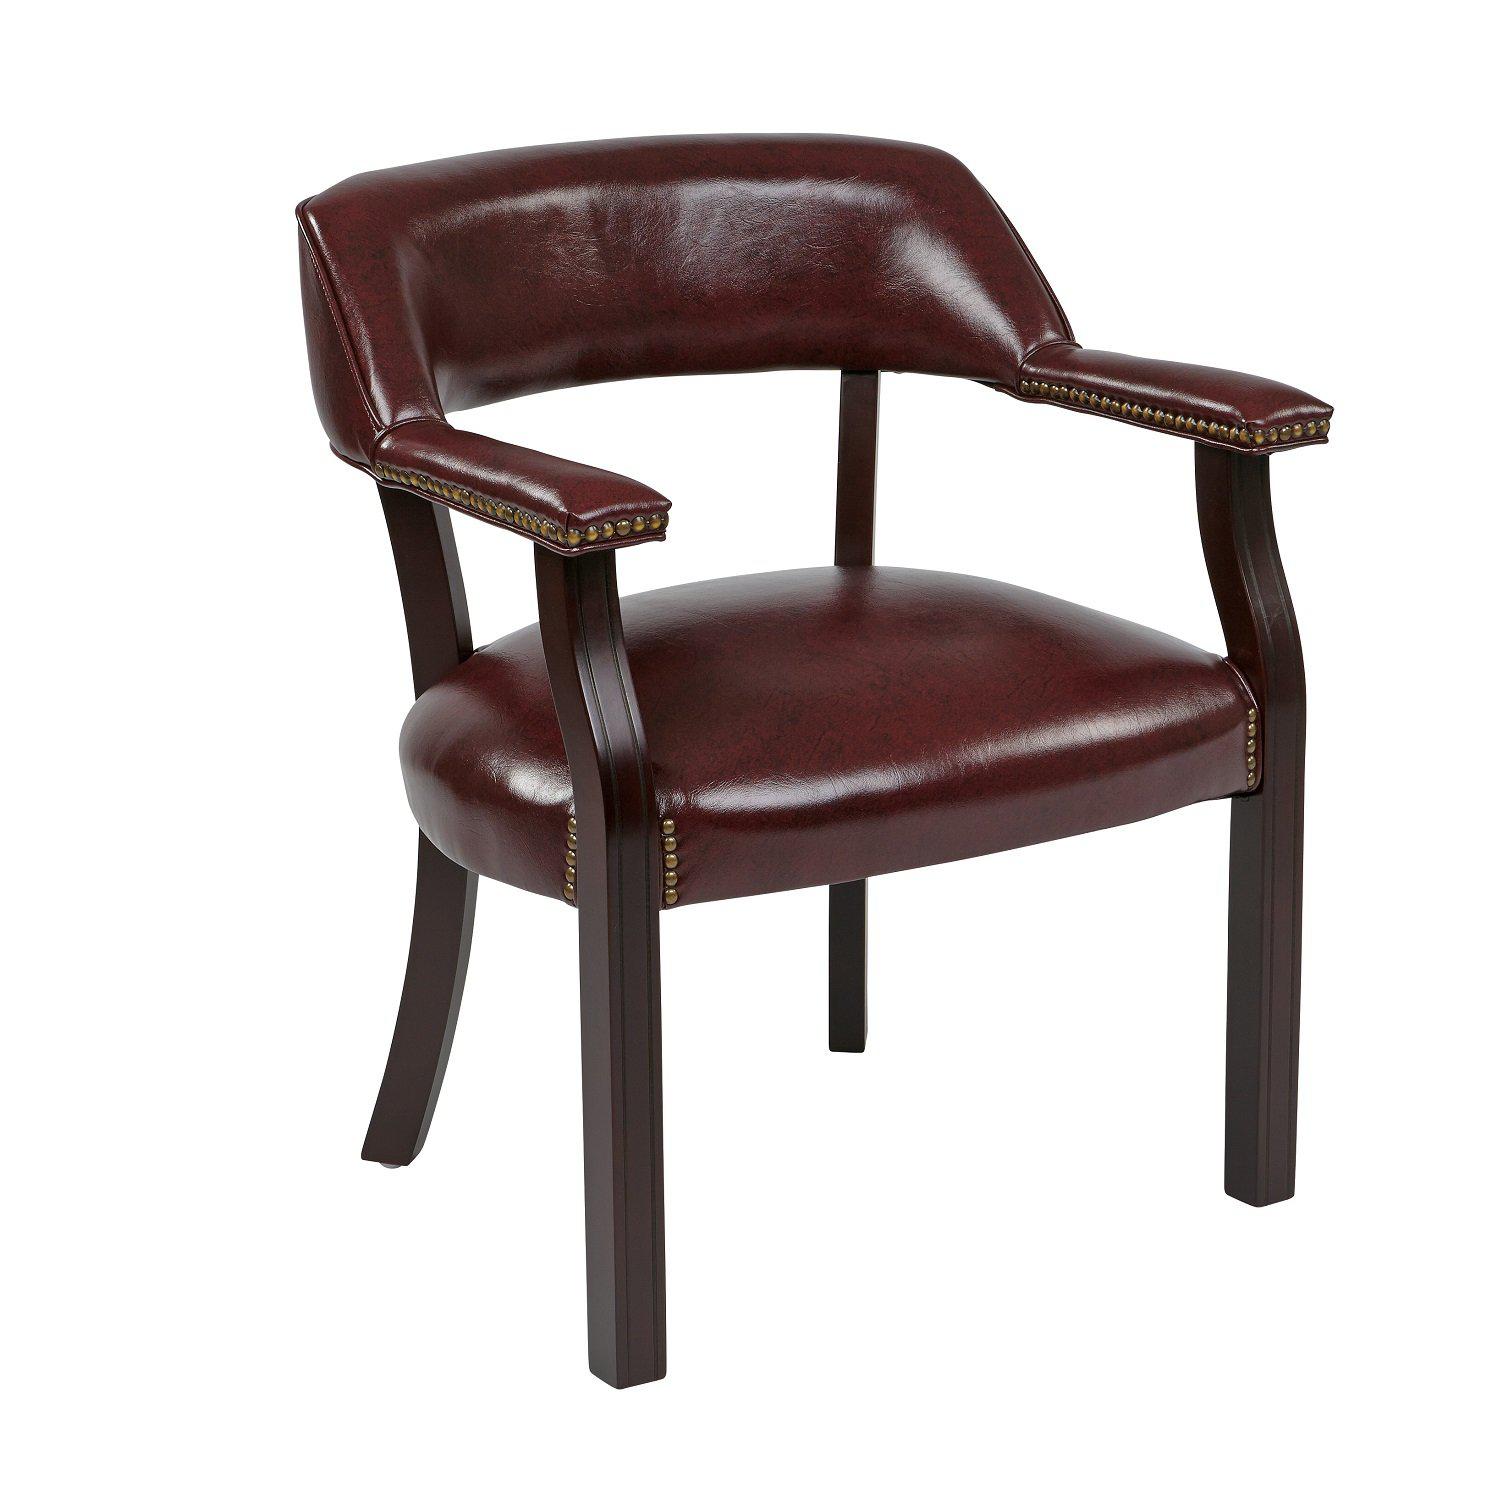 Traditional Guest Chair with Wrap Around Back, Oxblood Vinyl Upholstery